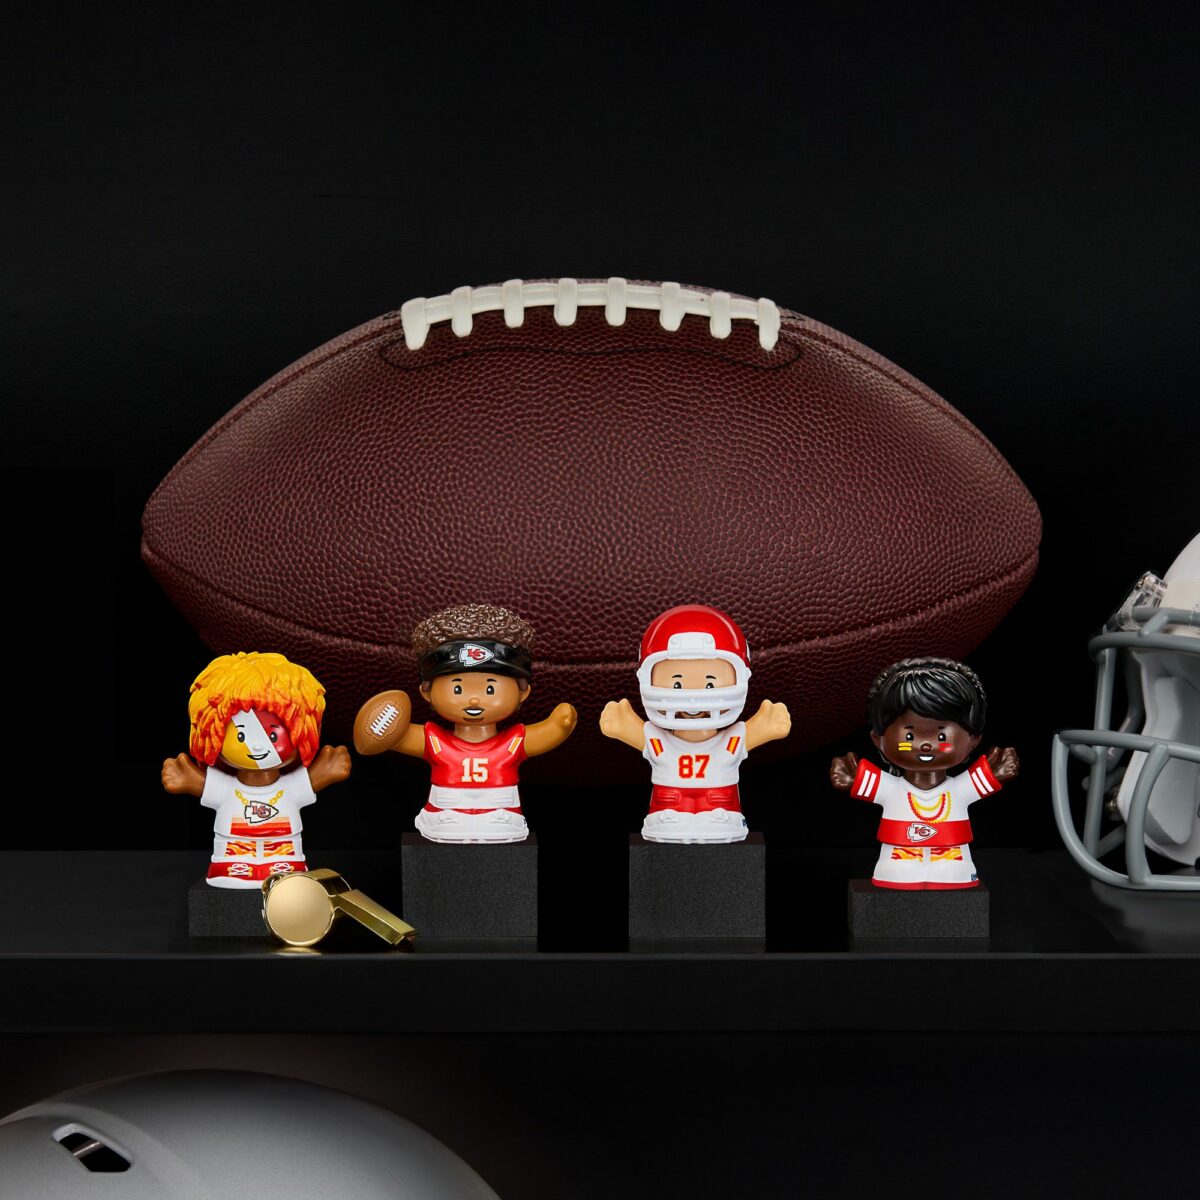 Chiefs stars Patrick Mahomes, Travis Kelce featured in ‘Little People’ collector set